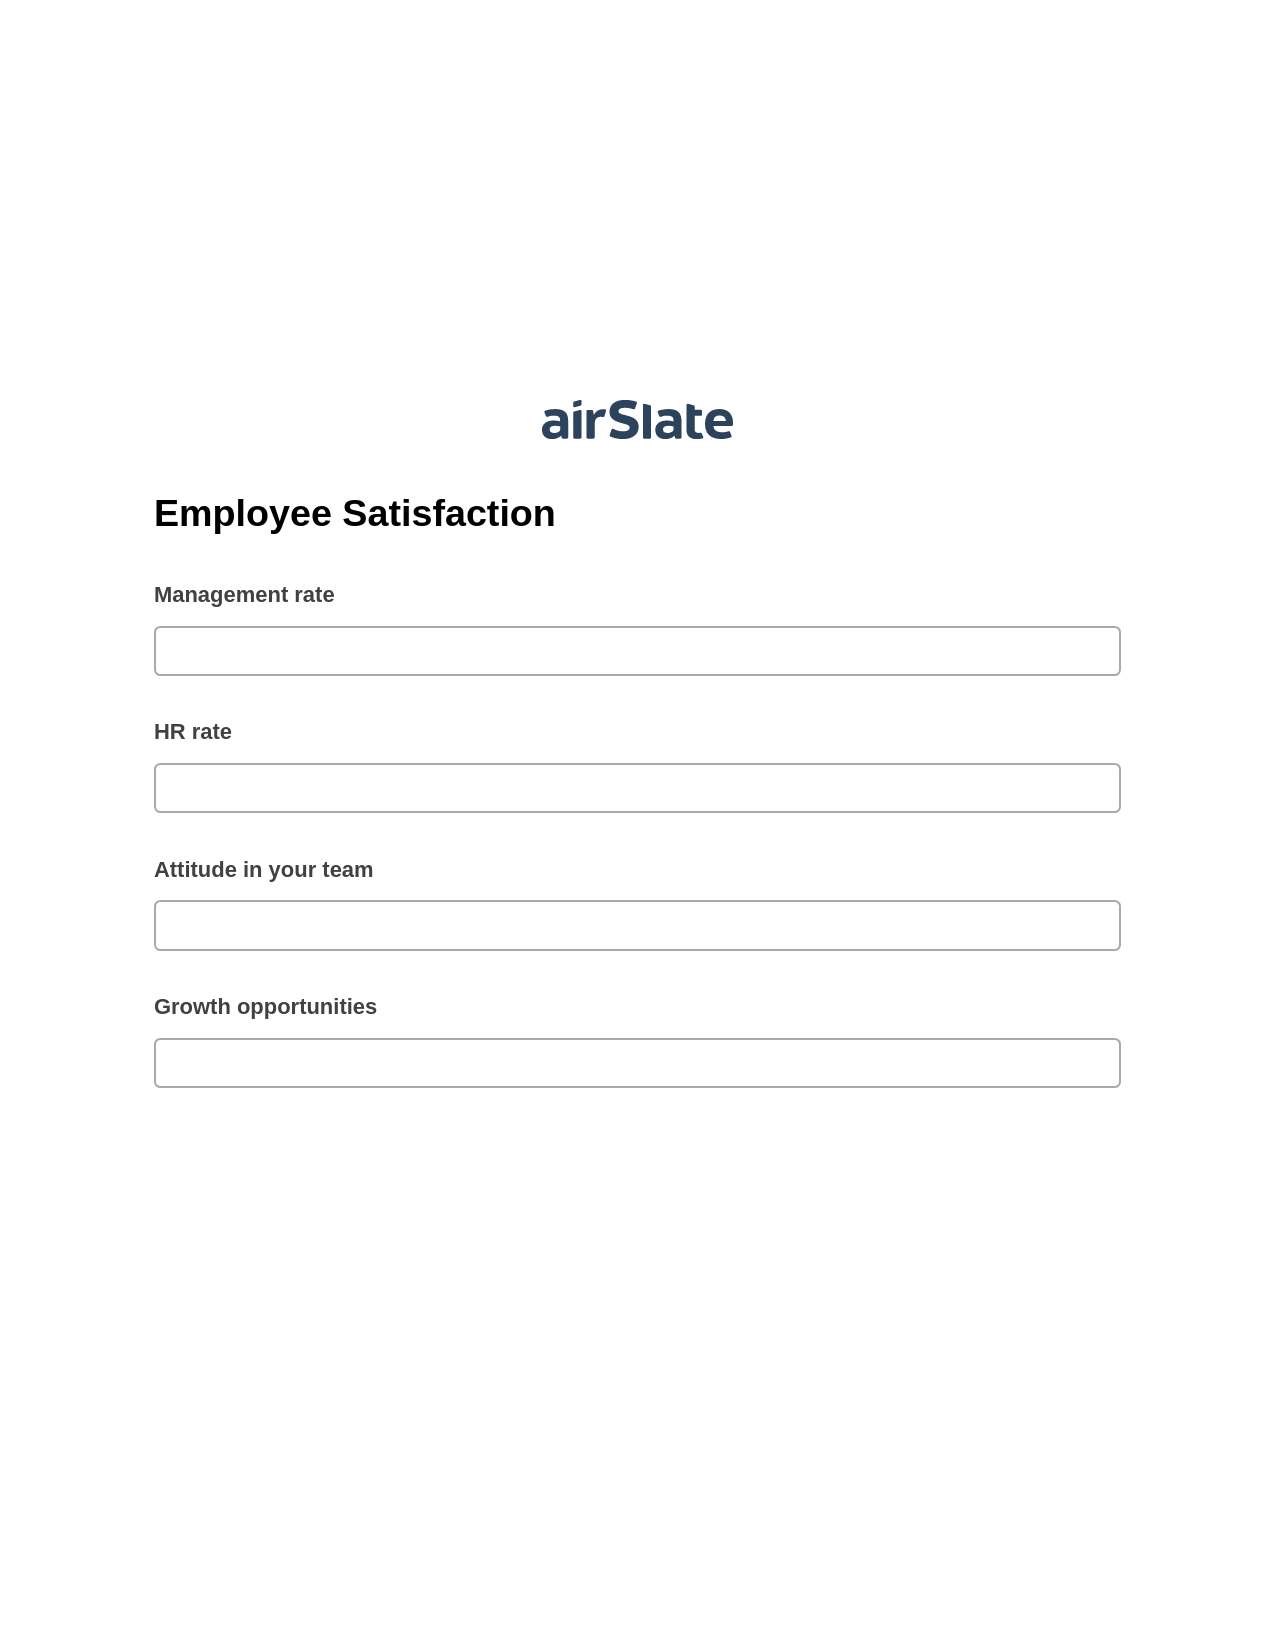 Employee Satisfaction Pre-fill from CSV File Bot, Text Message Notification Bot, Google Drive Bot